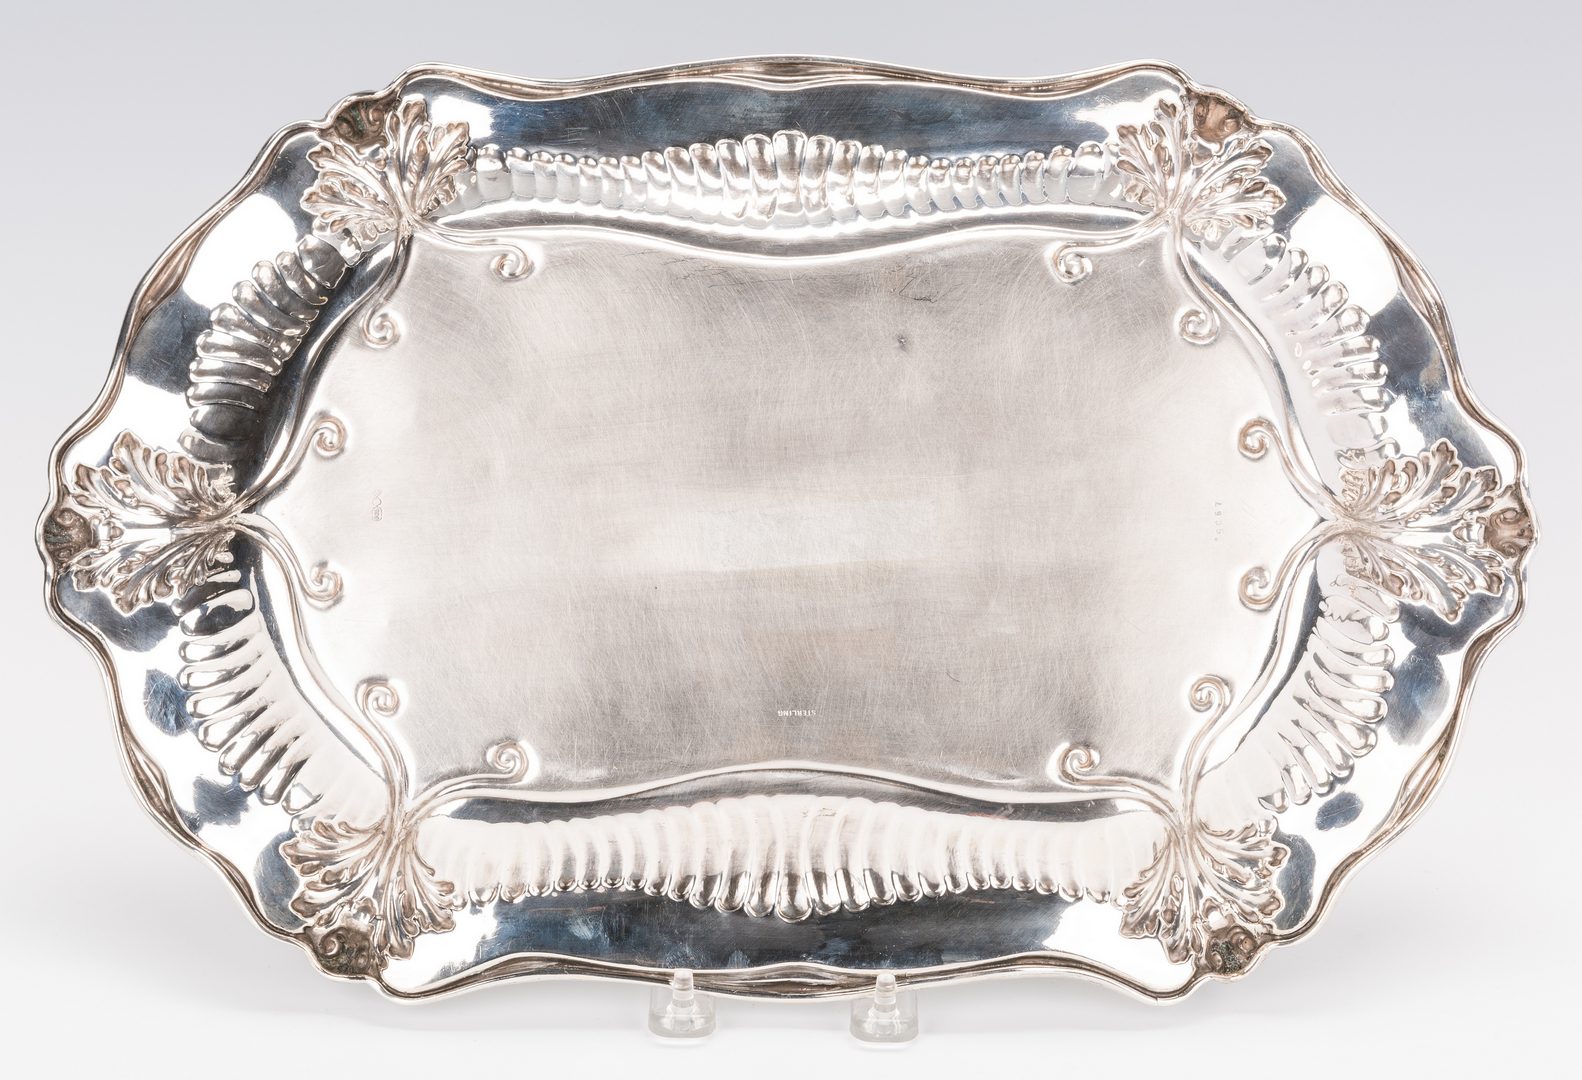 Lot 697: Dominick and Haff Sterling Tray